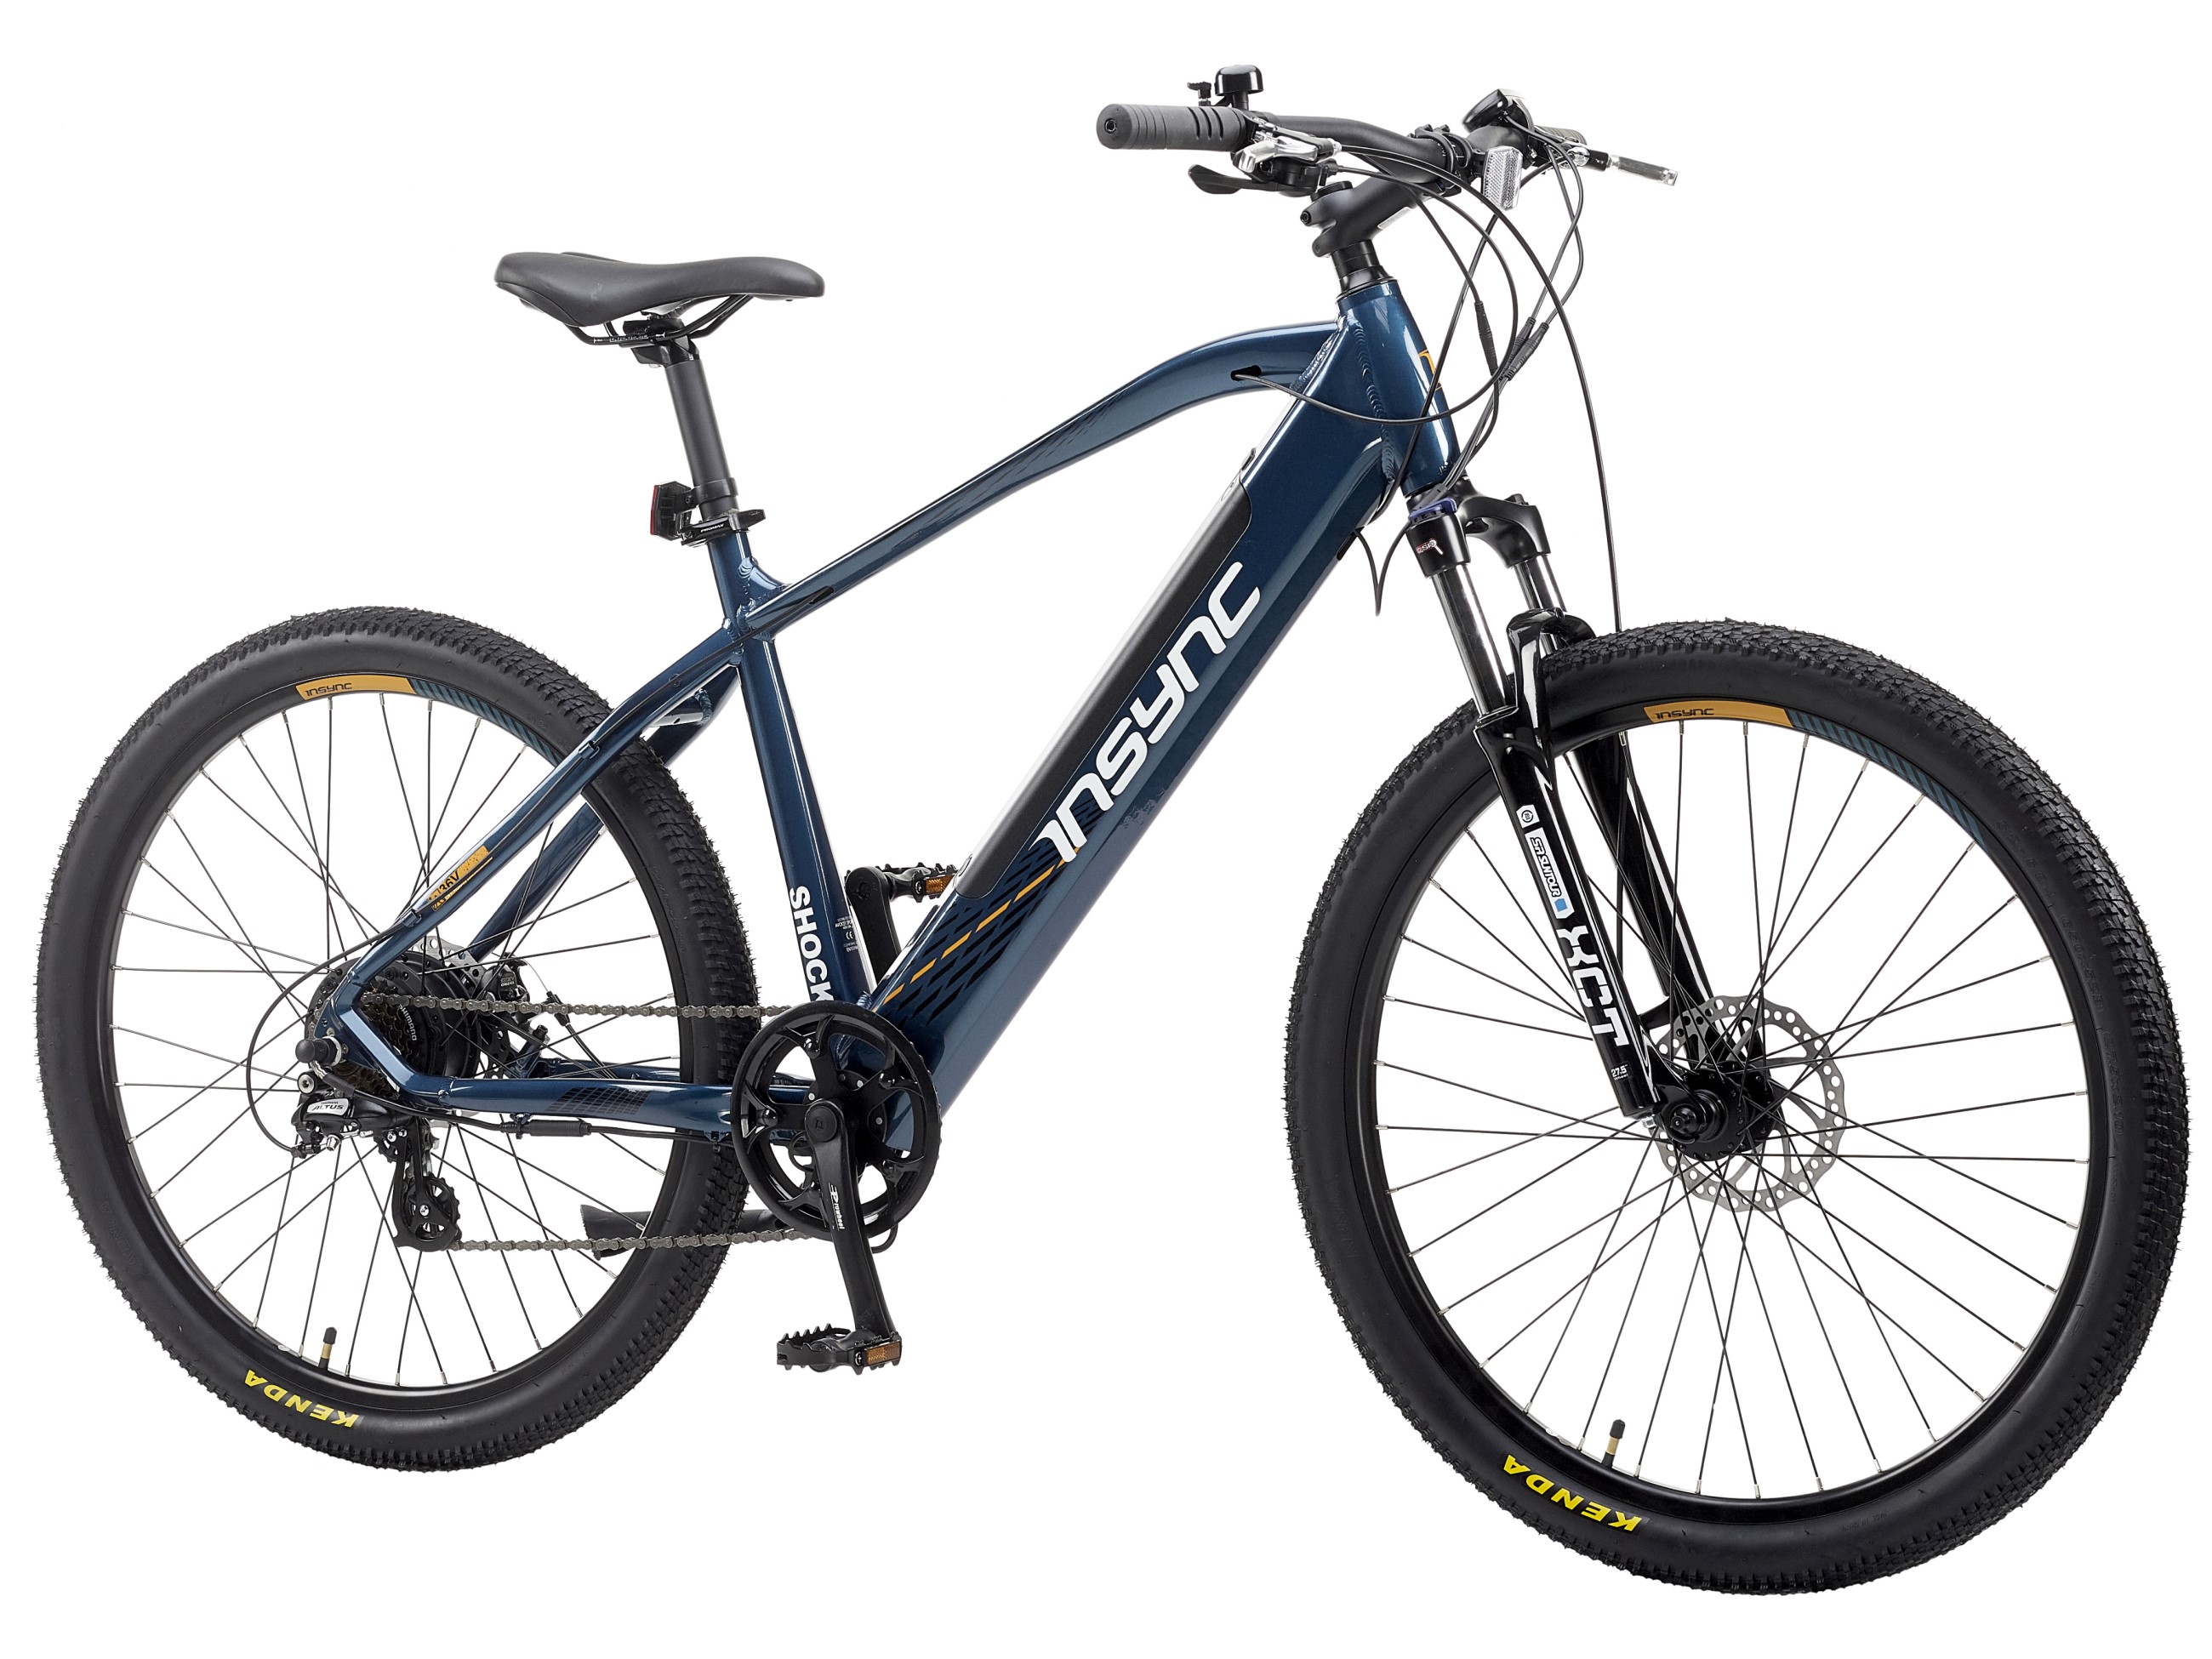 what size bike do i need for a 3 year old